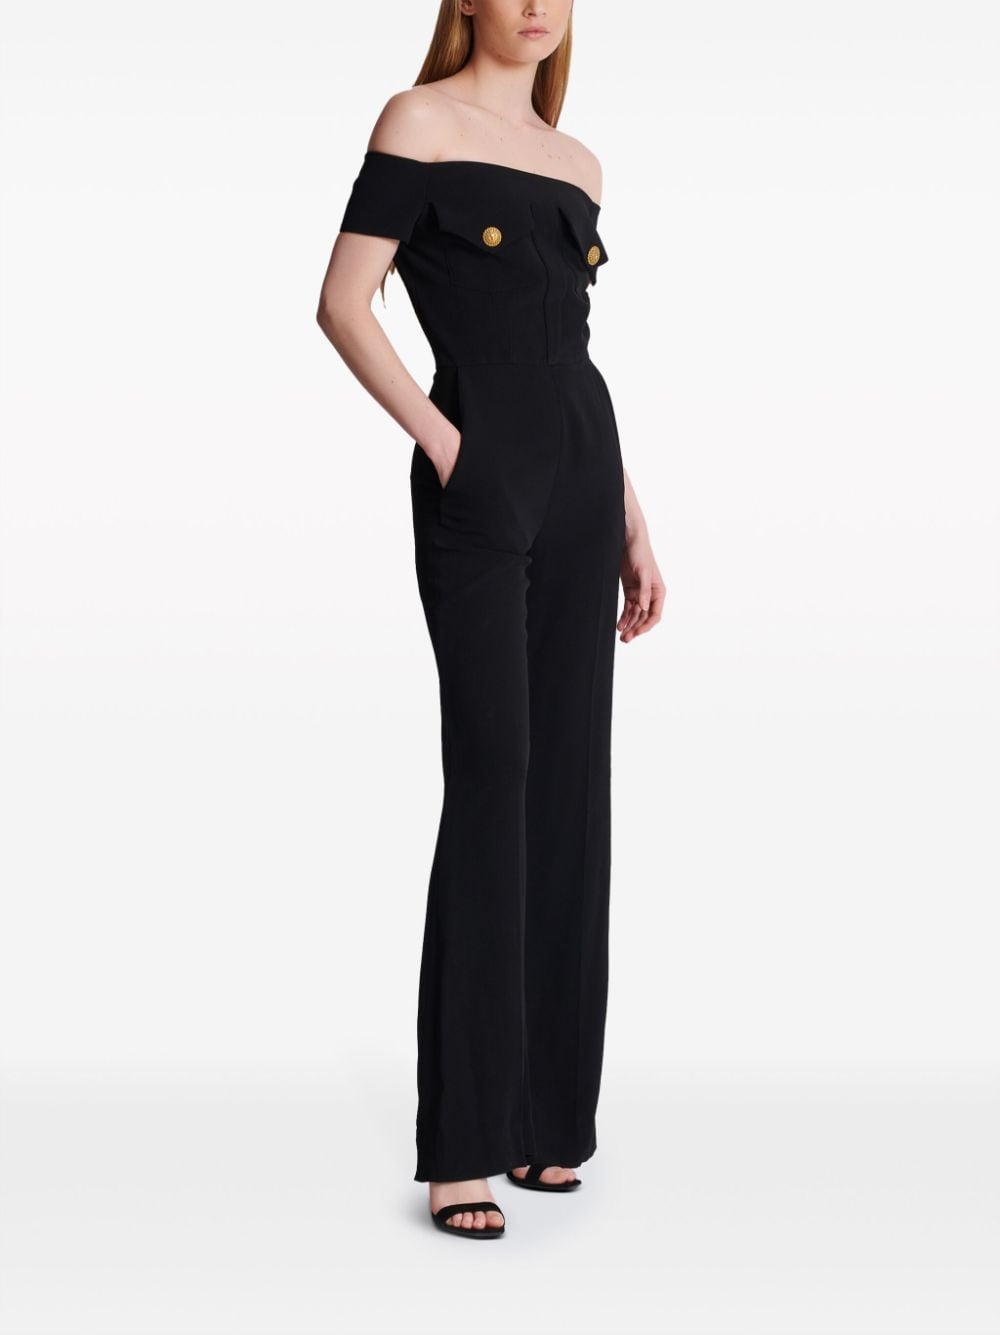 BALMAIN Black Pleated Jumpsuit with Gold-Tone Details for Women